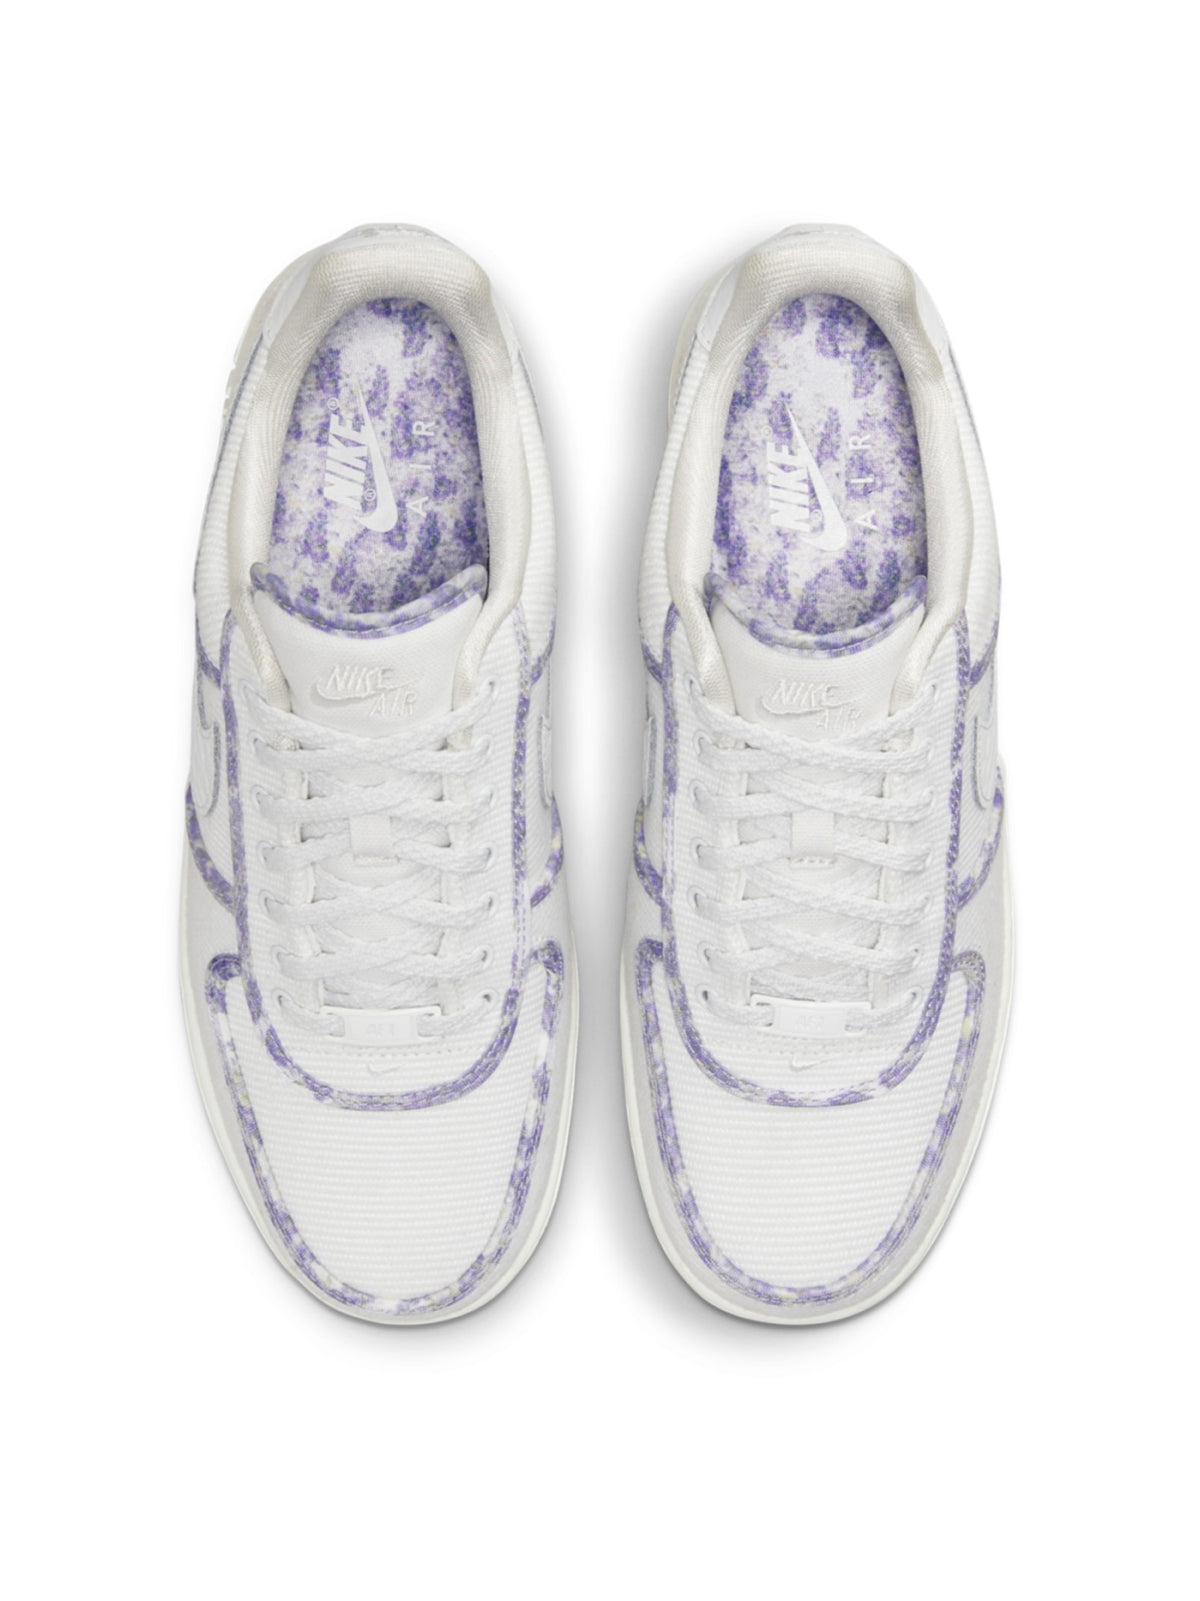 Nike-OUTLET-SALE-Air Force 1 Low Lavender Sneakers-ARCHIVIST